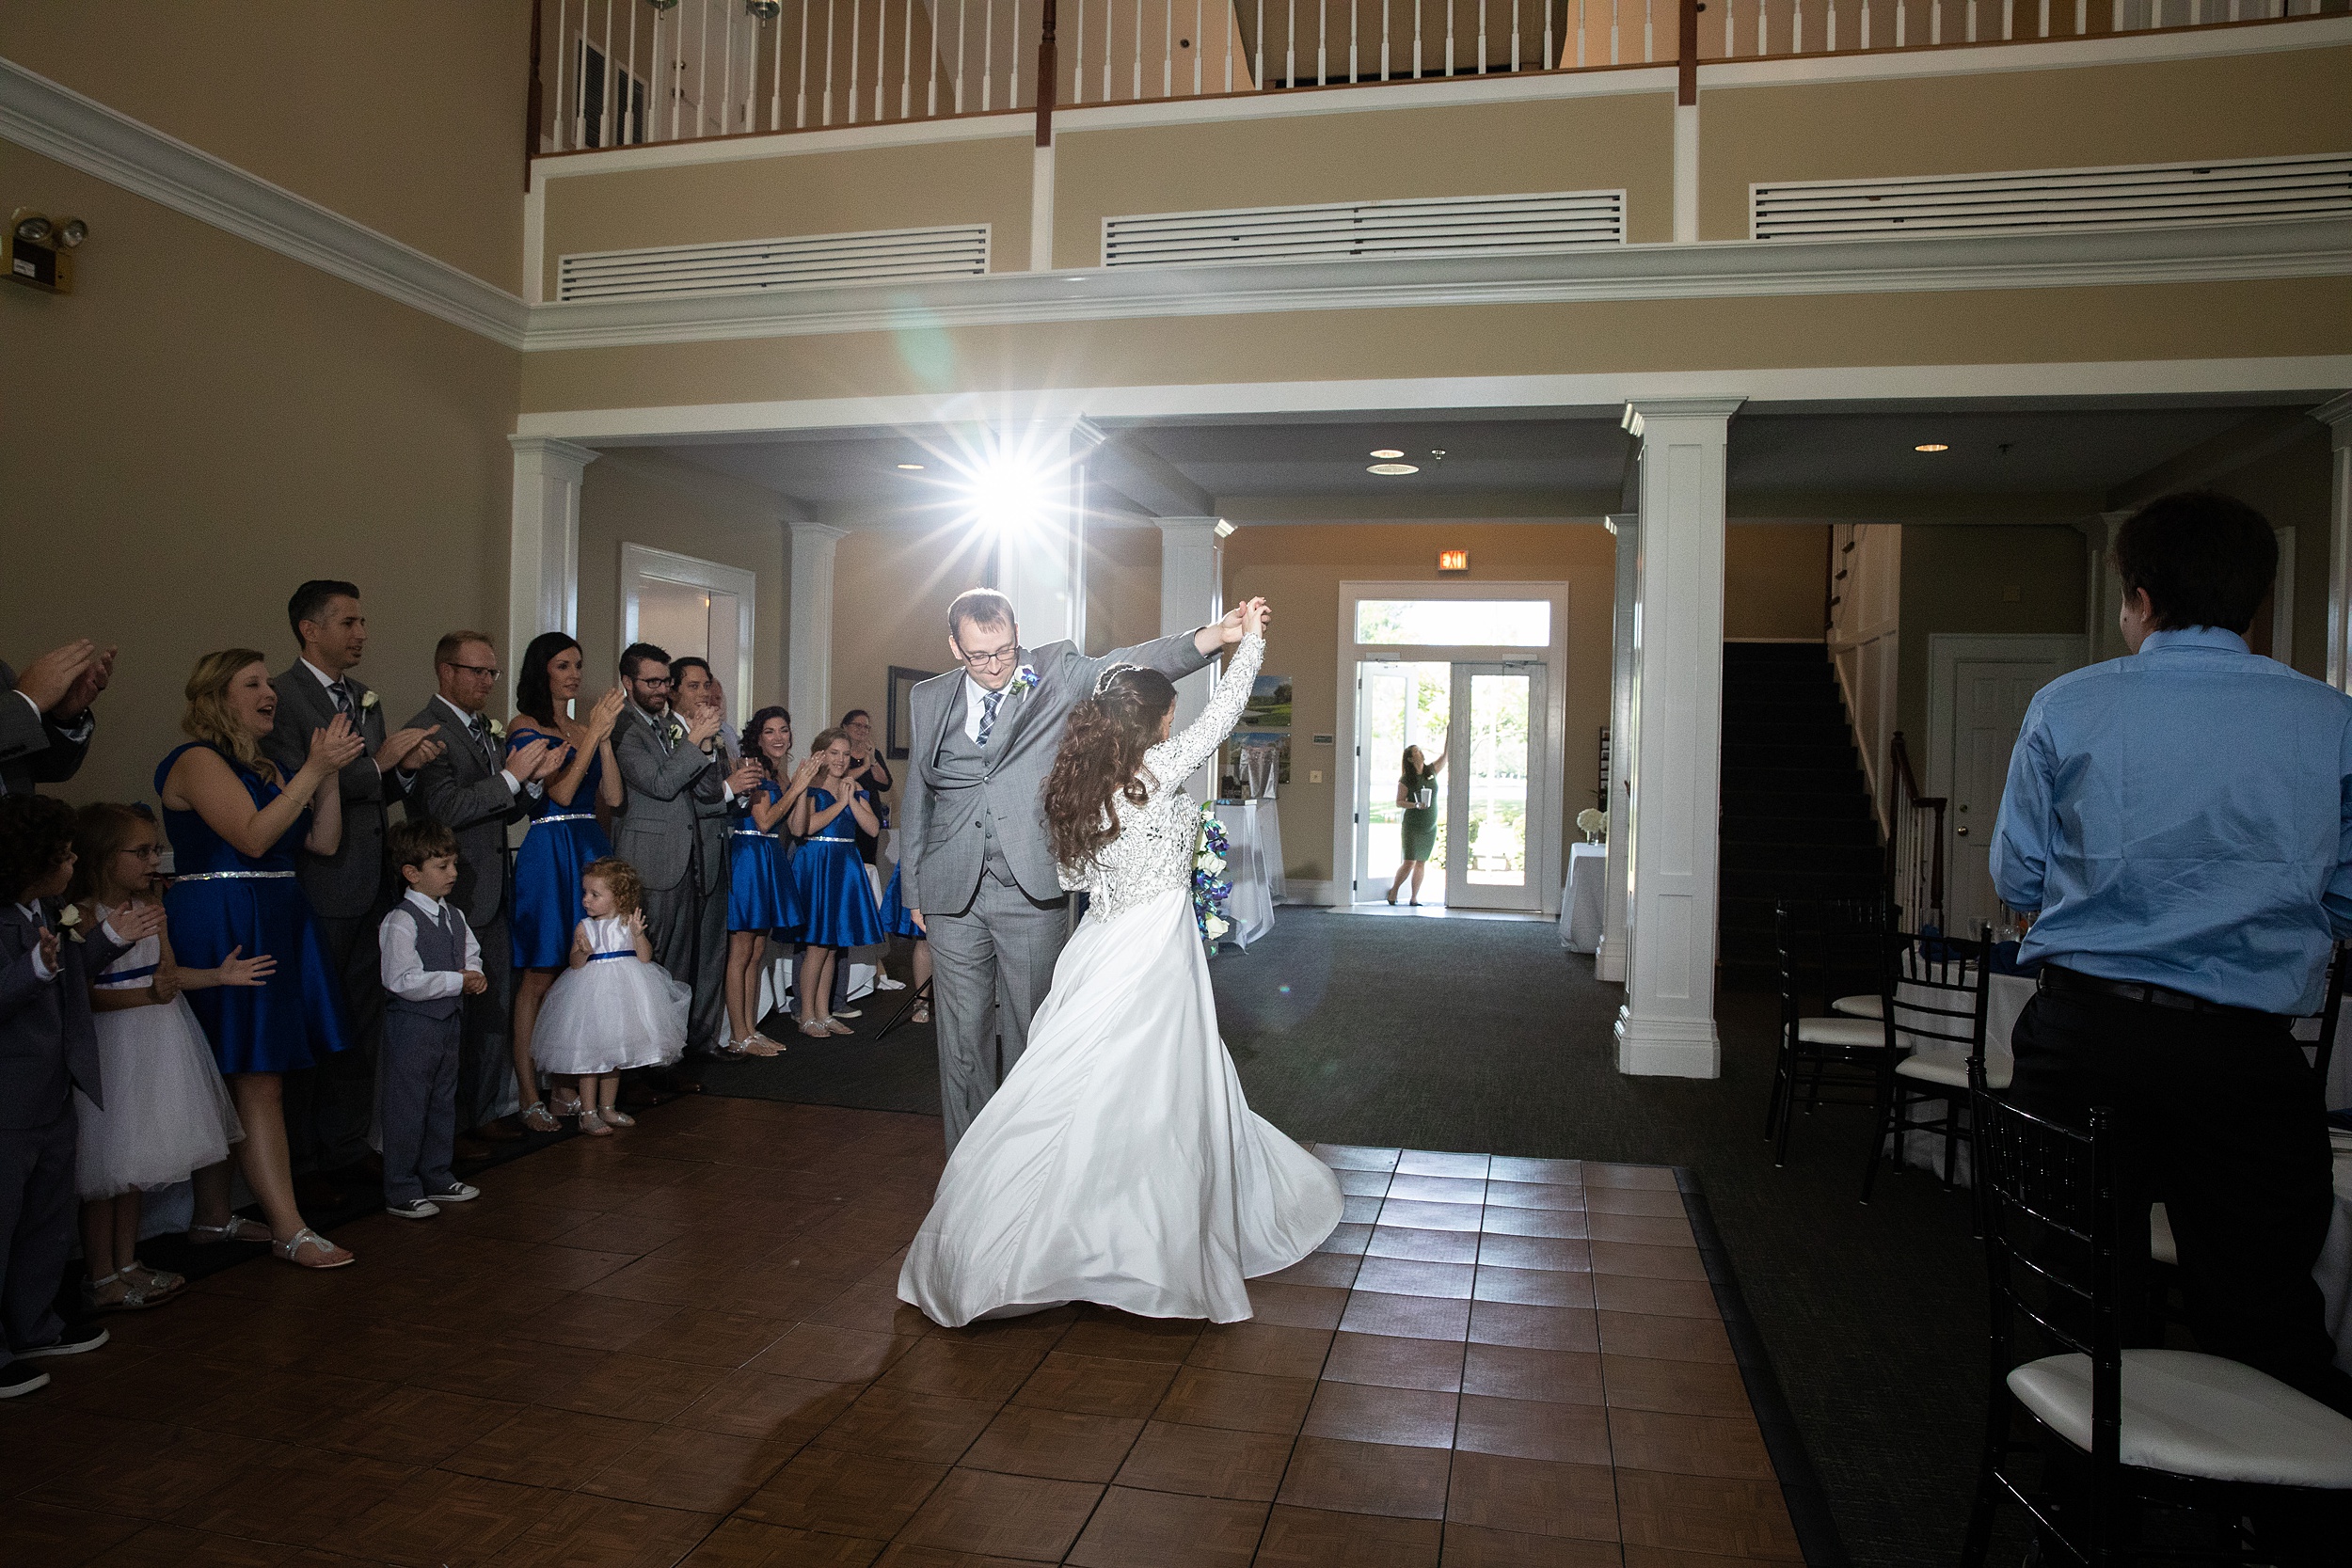 A groom twirls his bride while dancing at their deercreek country club wedding reception